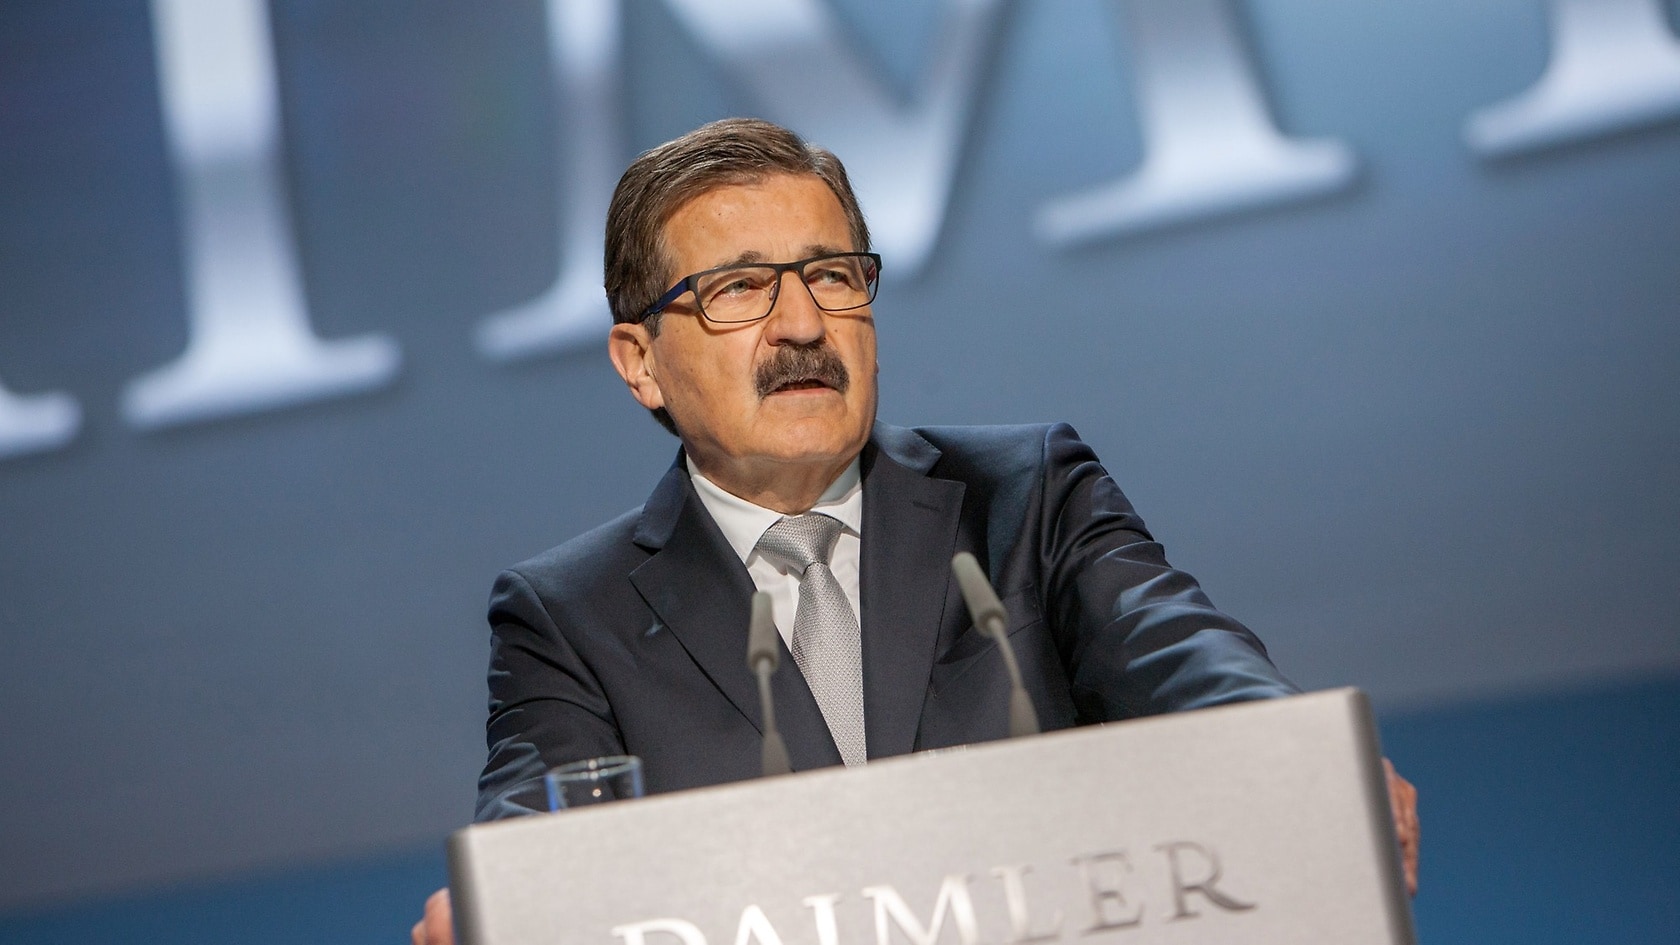 Dr. Manfred Bischoff - Chairman of the Supervisory Board of Daimler AG